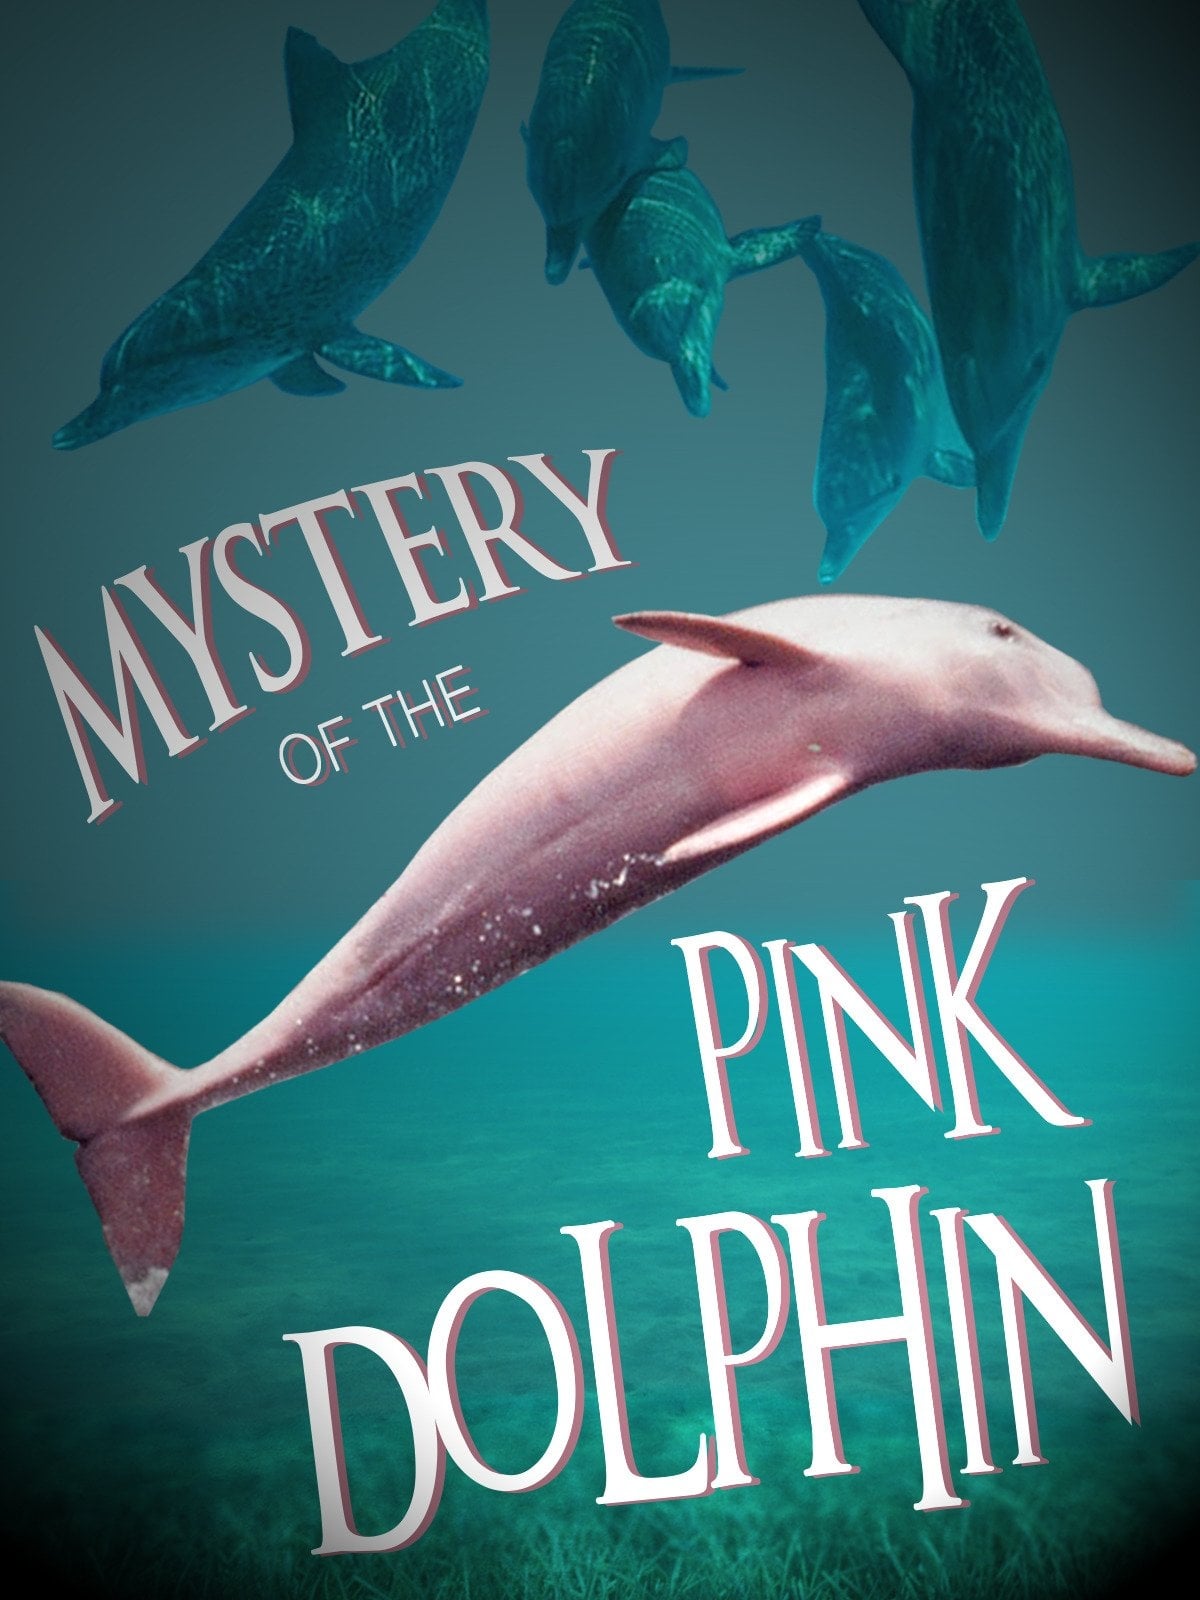 The Mystery of the Pink Dolphin